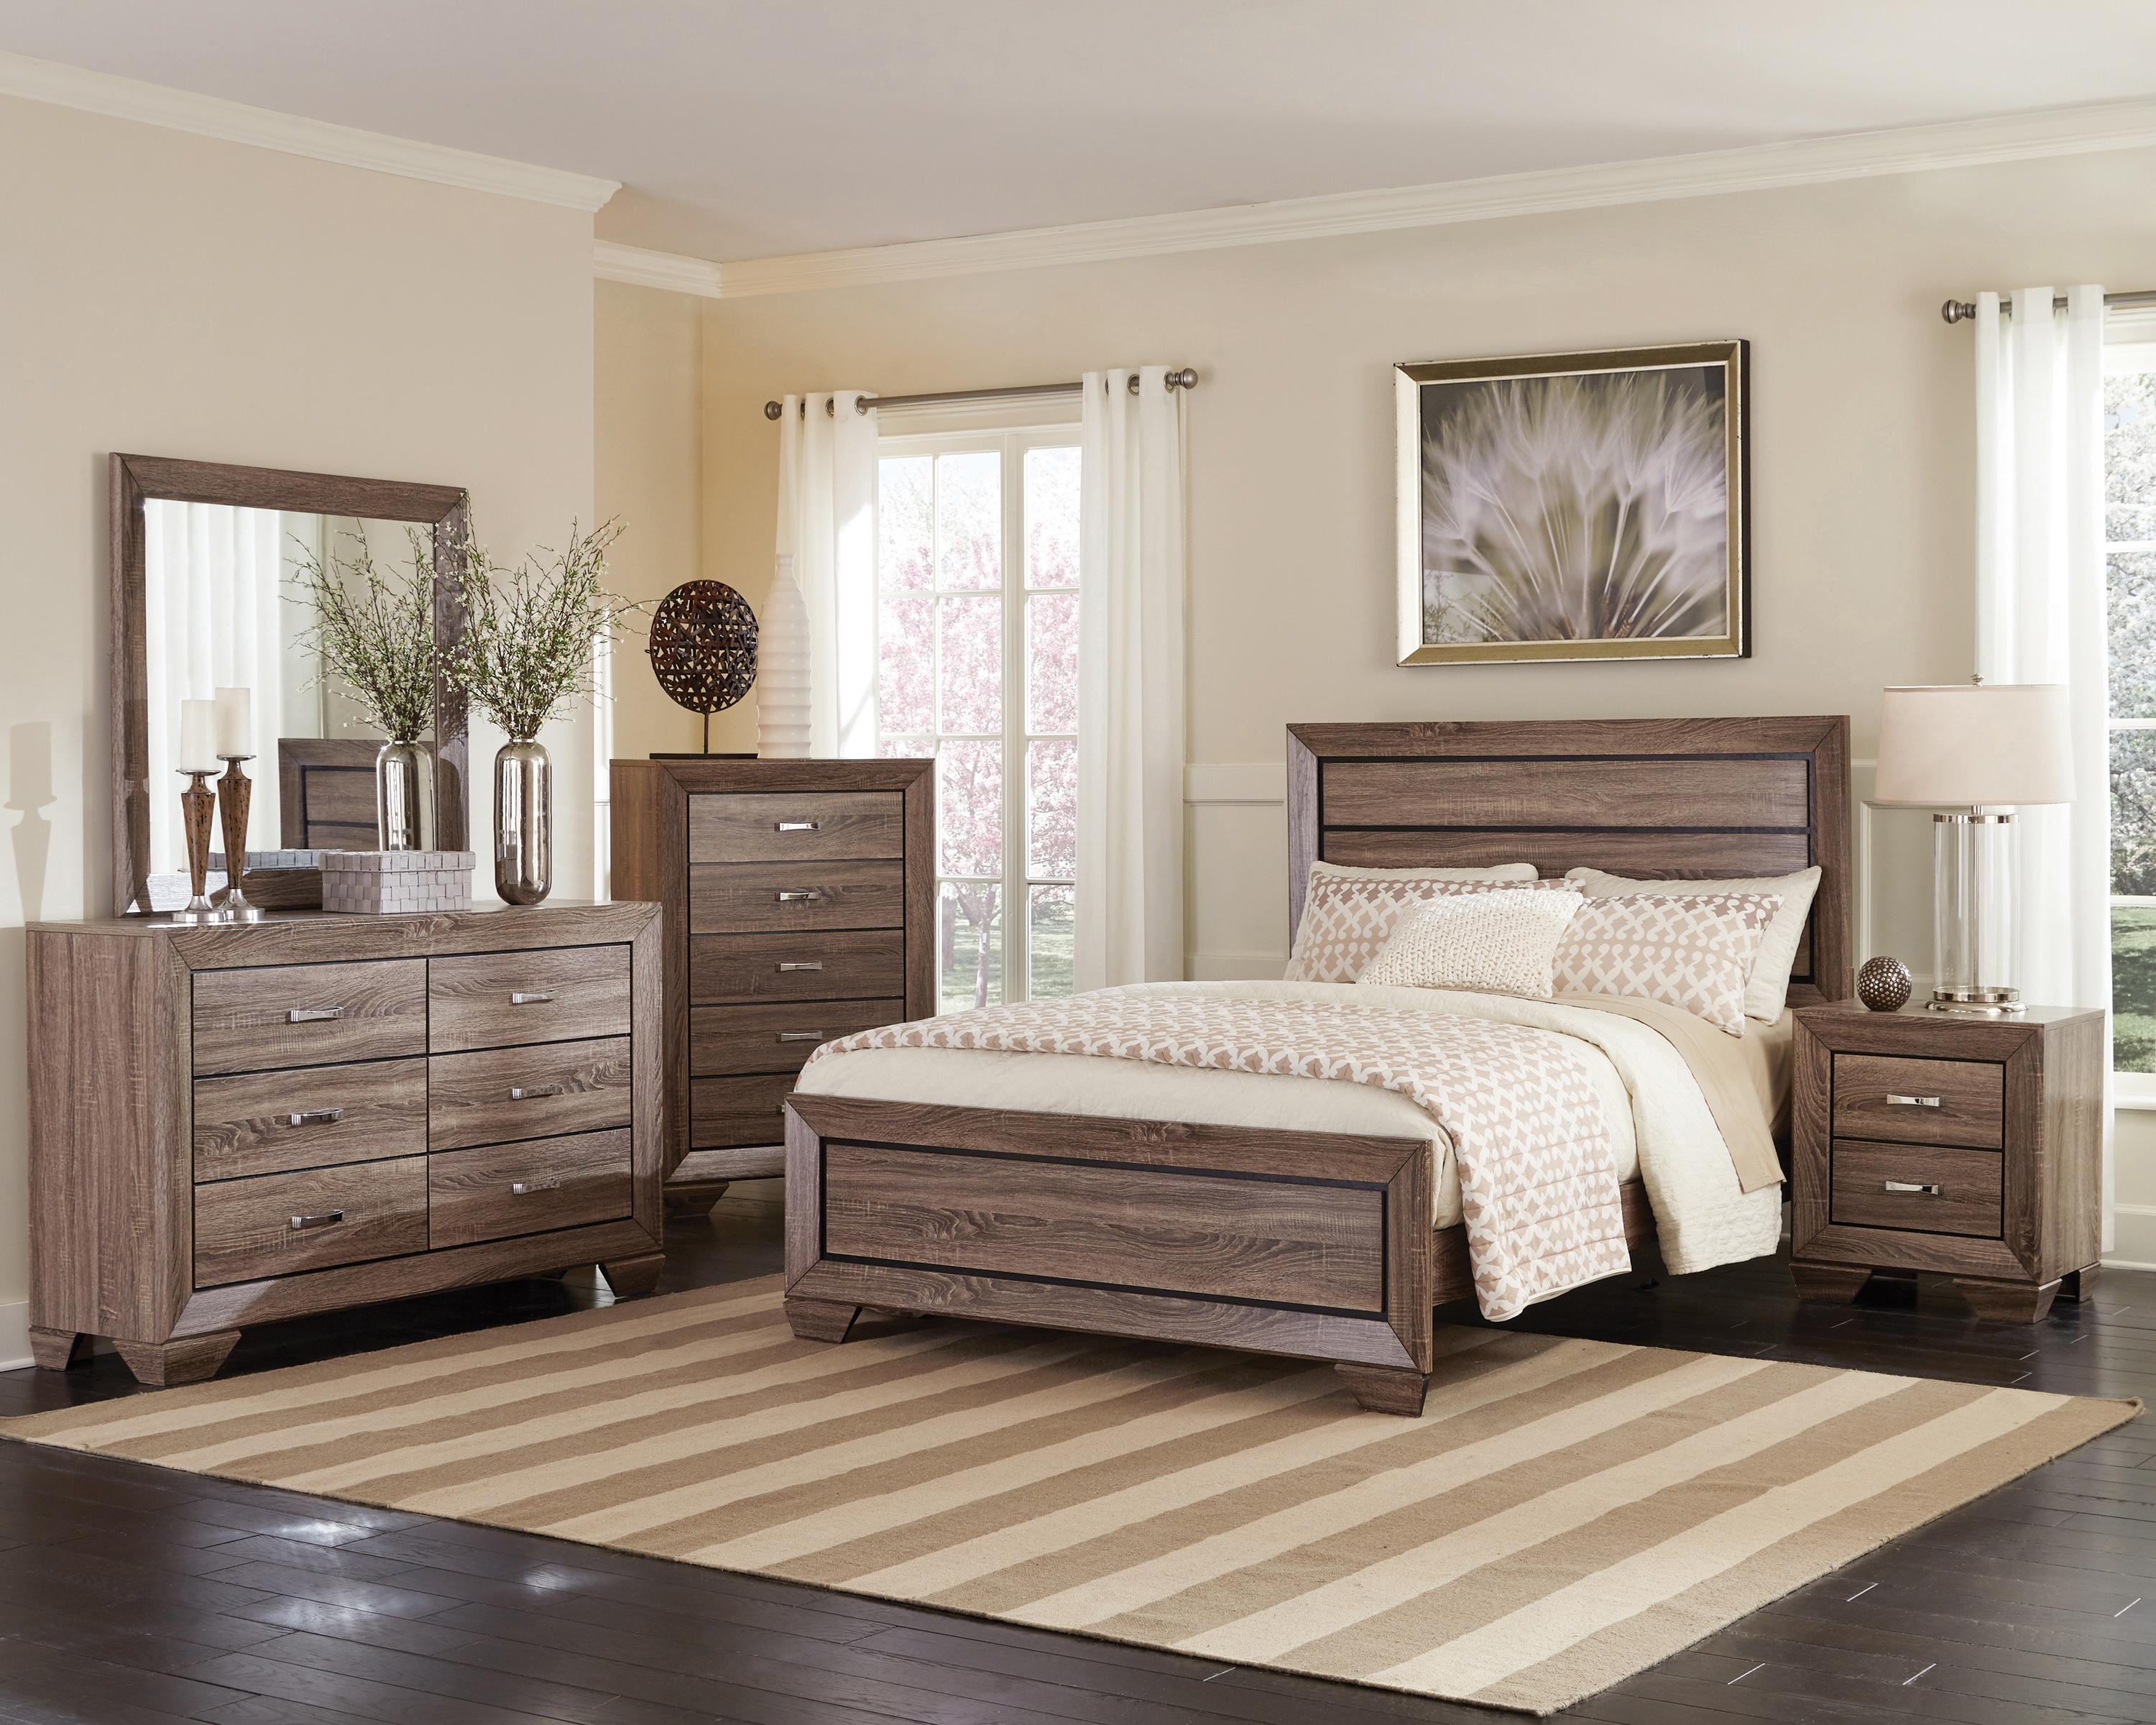 Transitional Bedroom Set 204191KW-5PC Kauffman 204191KW-5PC in Taupe 